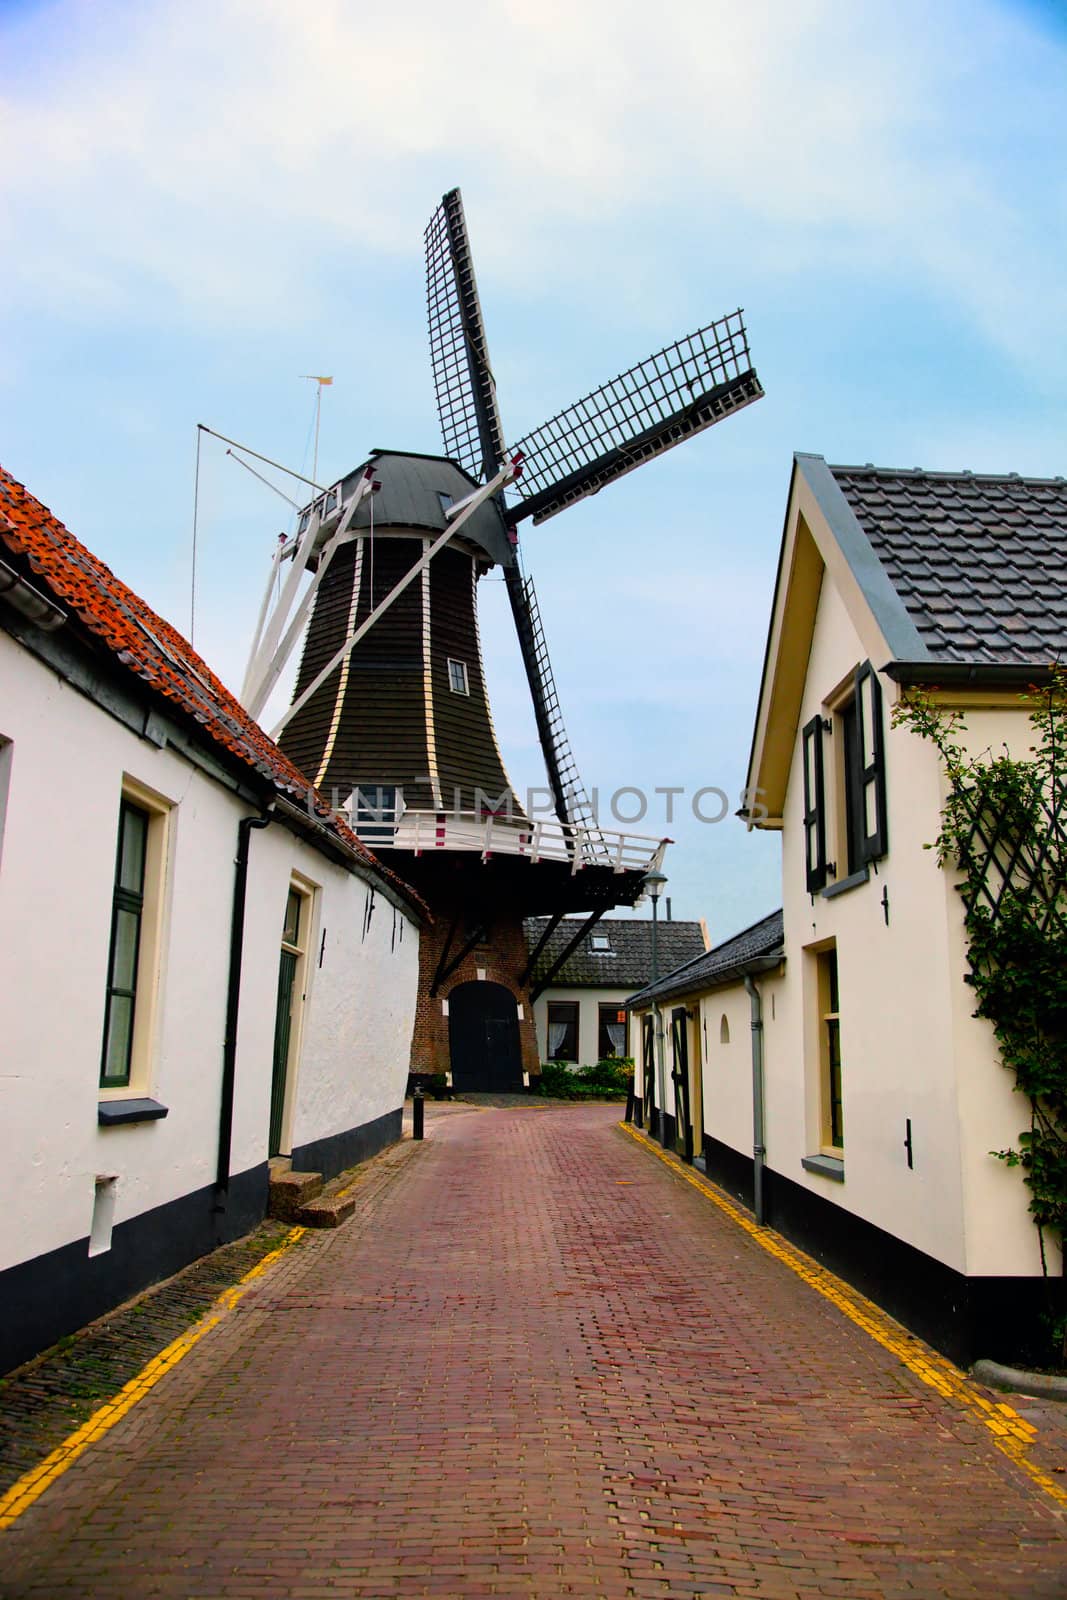 Windmill, historic small village in Netherlands by photocreo